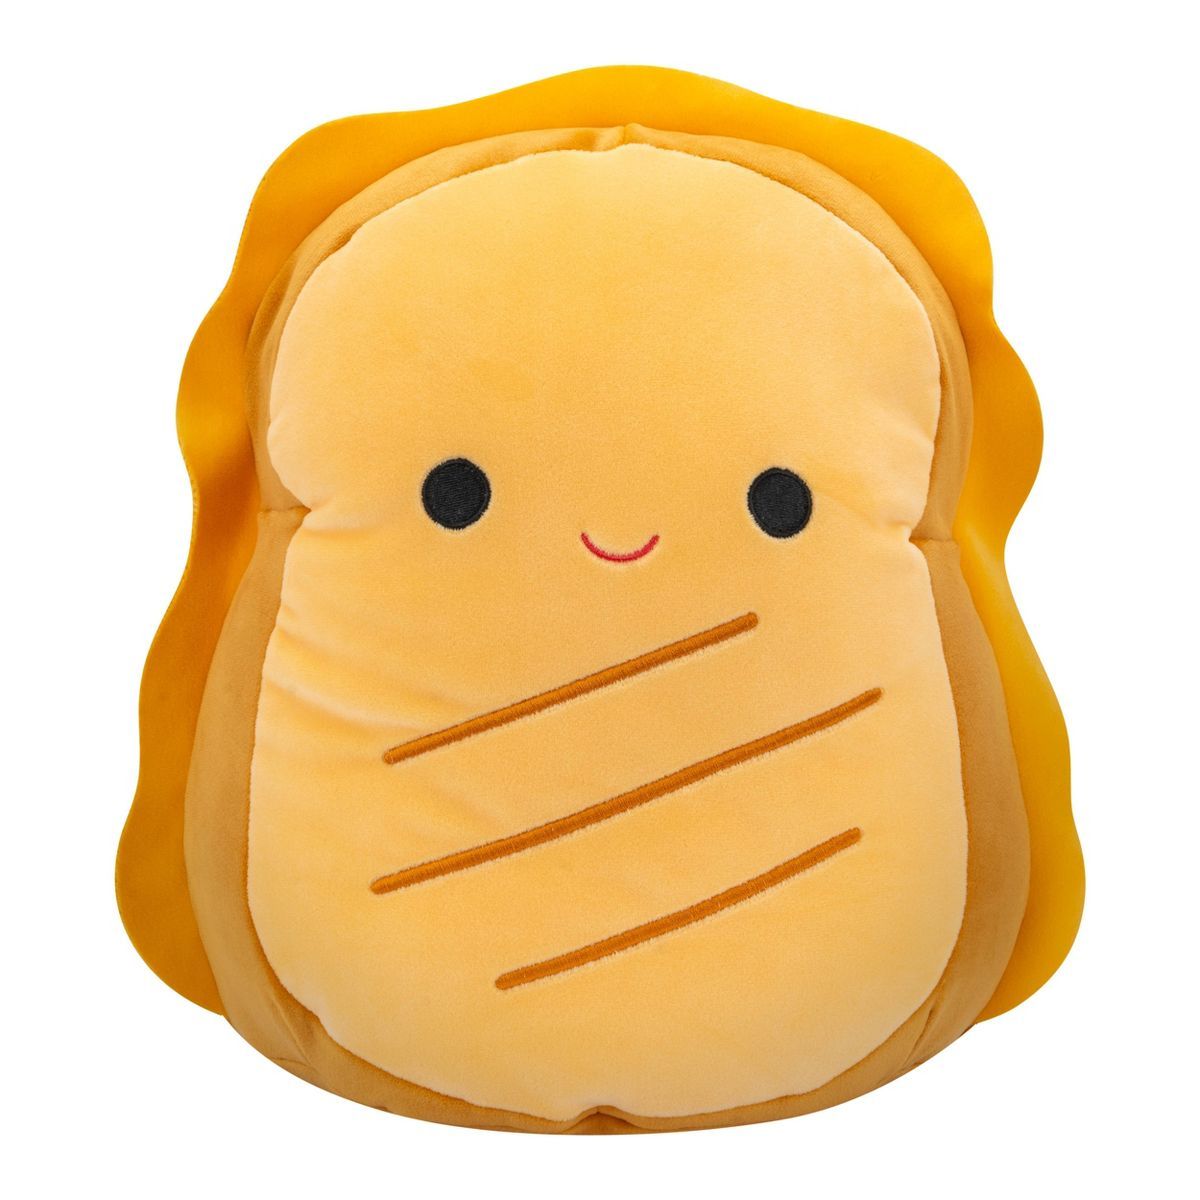 Squishmallows 11" Grilled Cheese Little Plush | Target